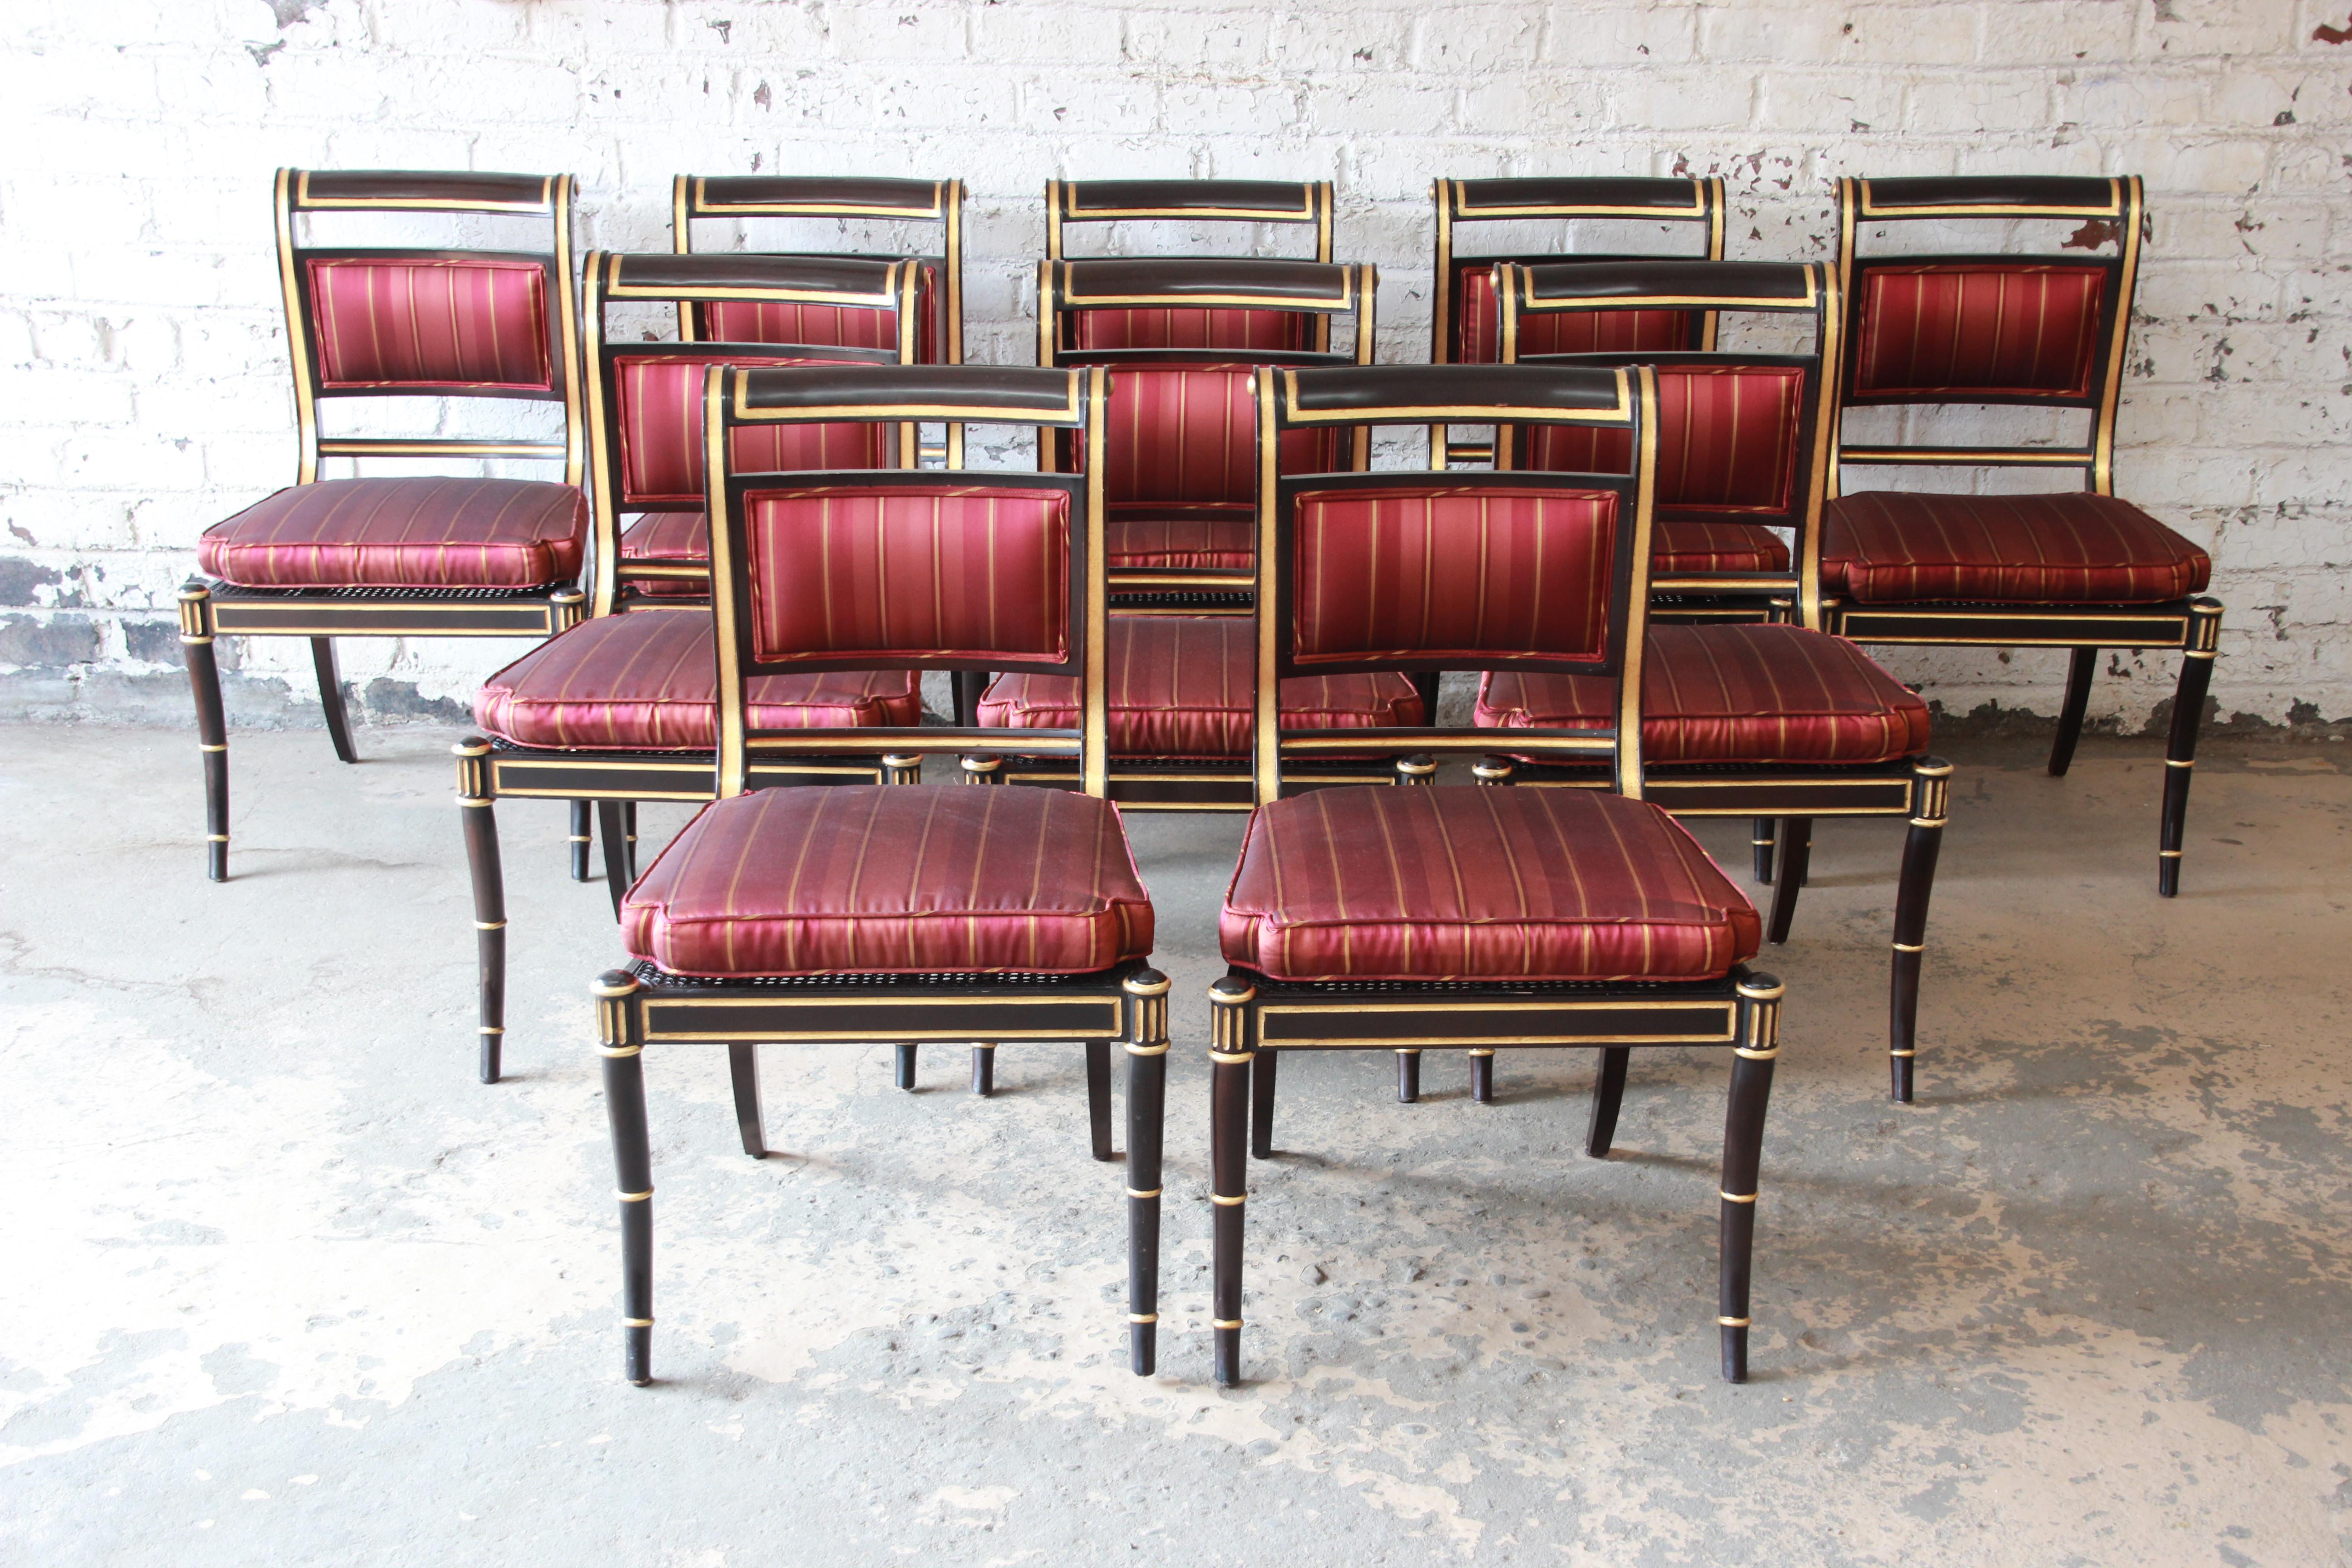 Offering a gorgeous set of ten Regency style dining chairs from the Baker Furniture Stately Homes Collection. The chairs feature a black finish with gold accents, caned backs and seats. Included are the original red and gold seat cushions. A